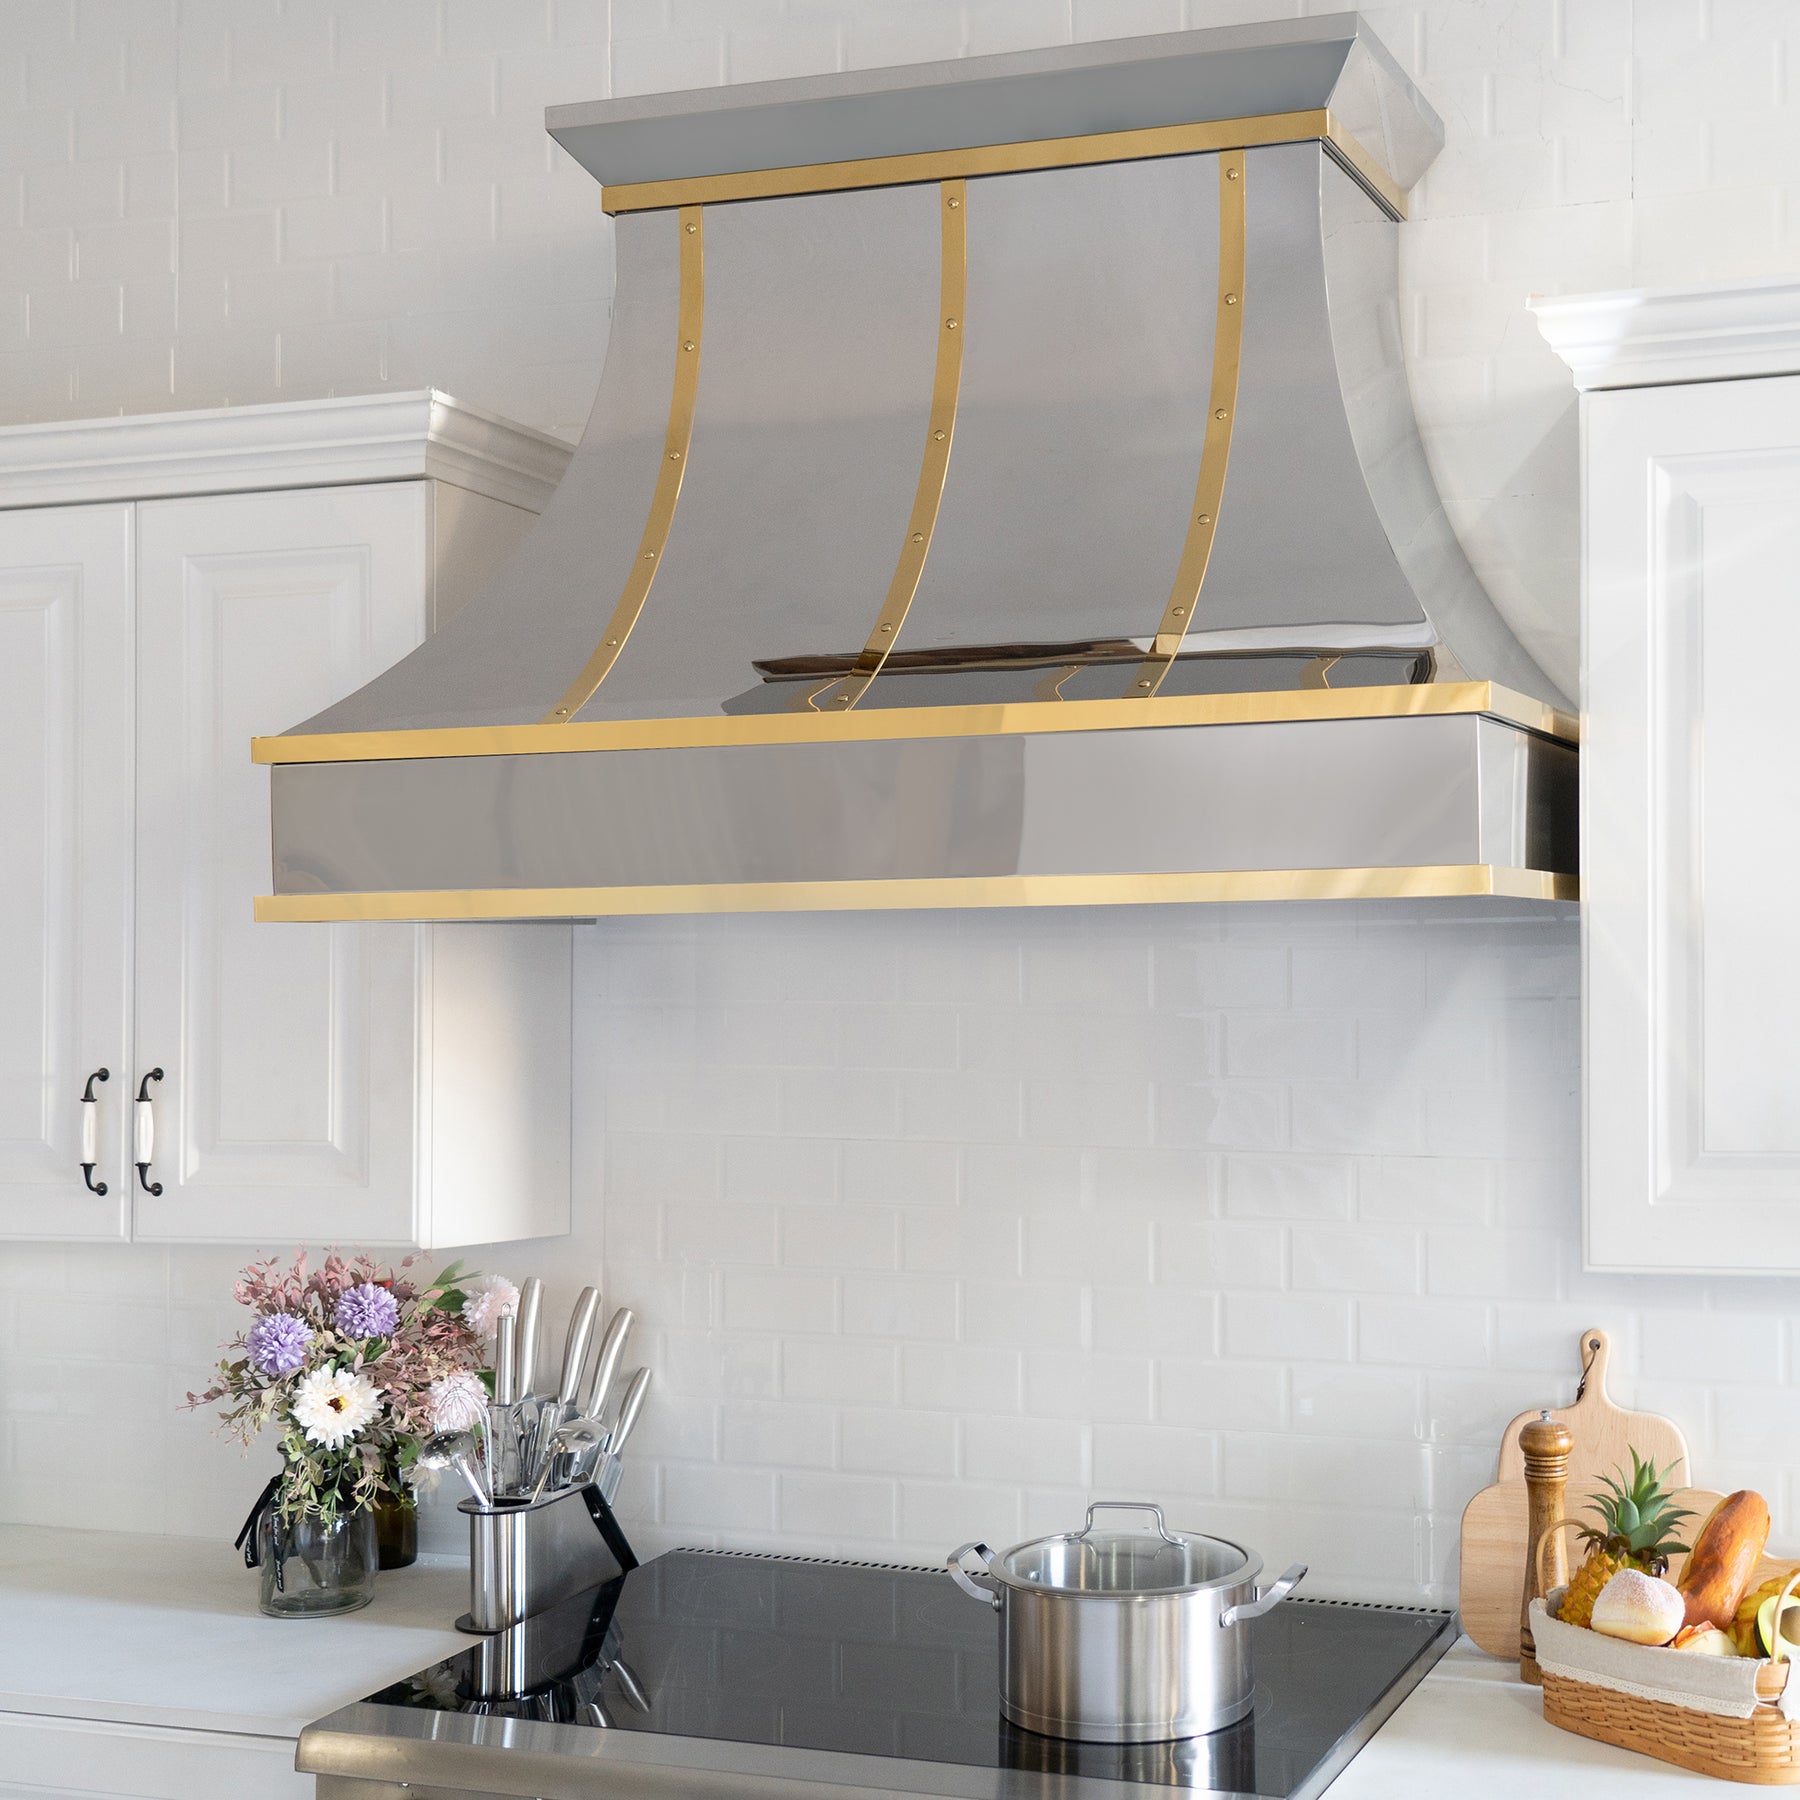 Fobest custom polished stainless steel range hood with brass straps rivets